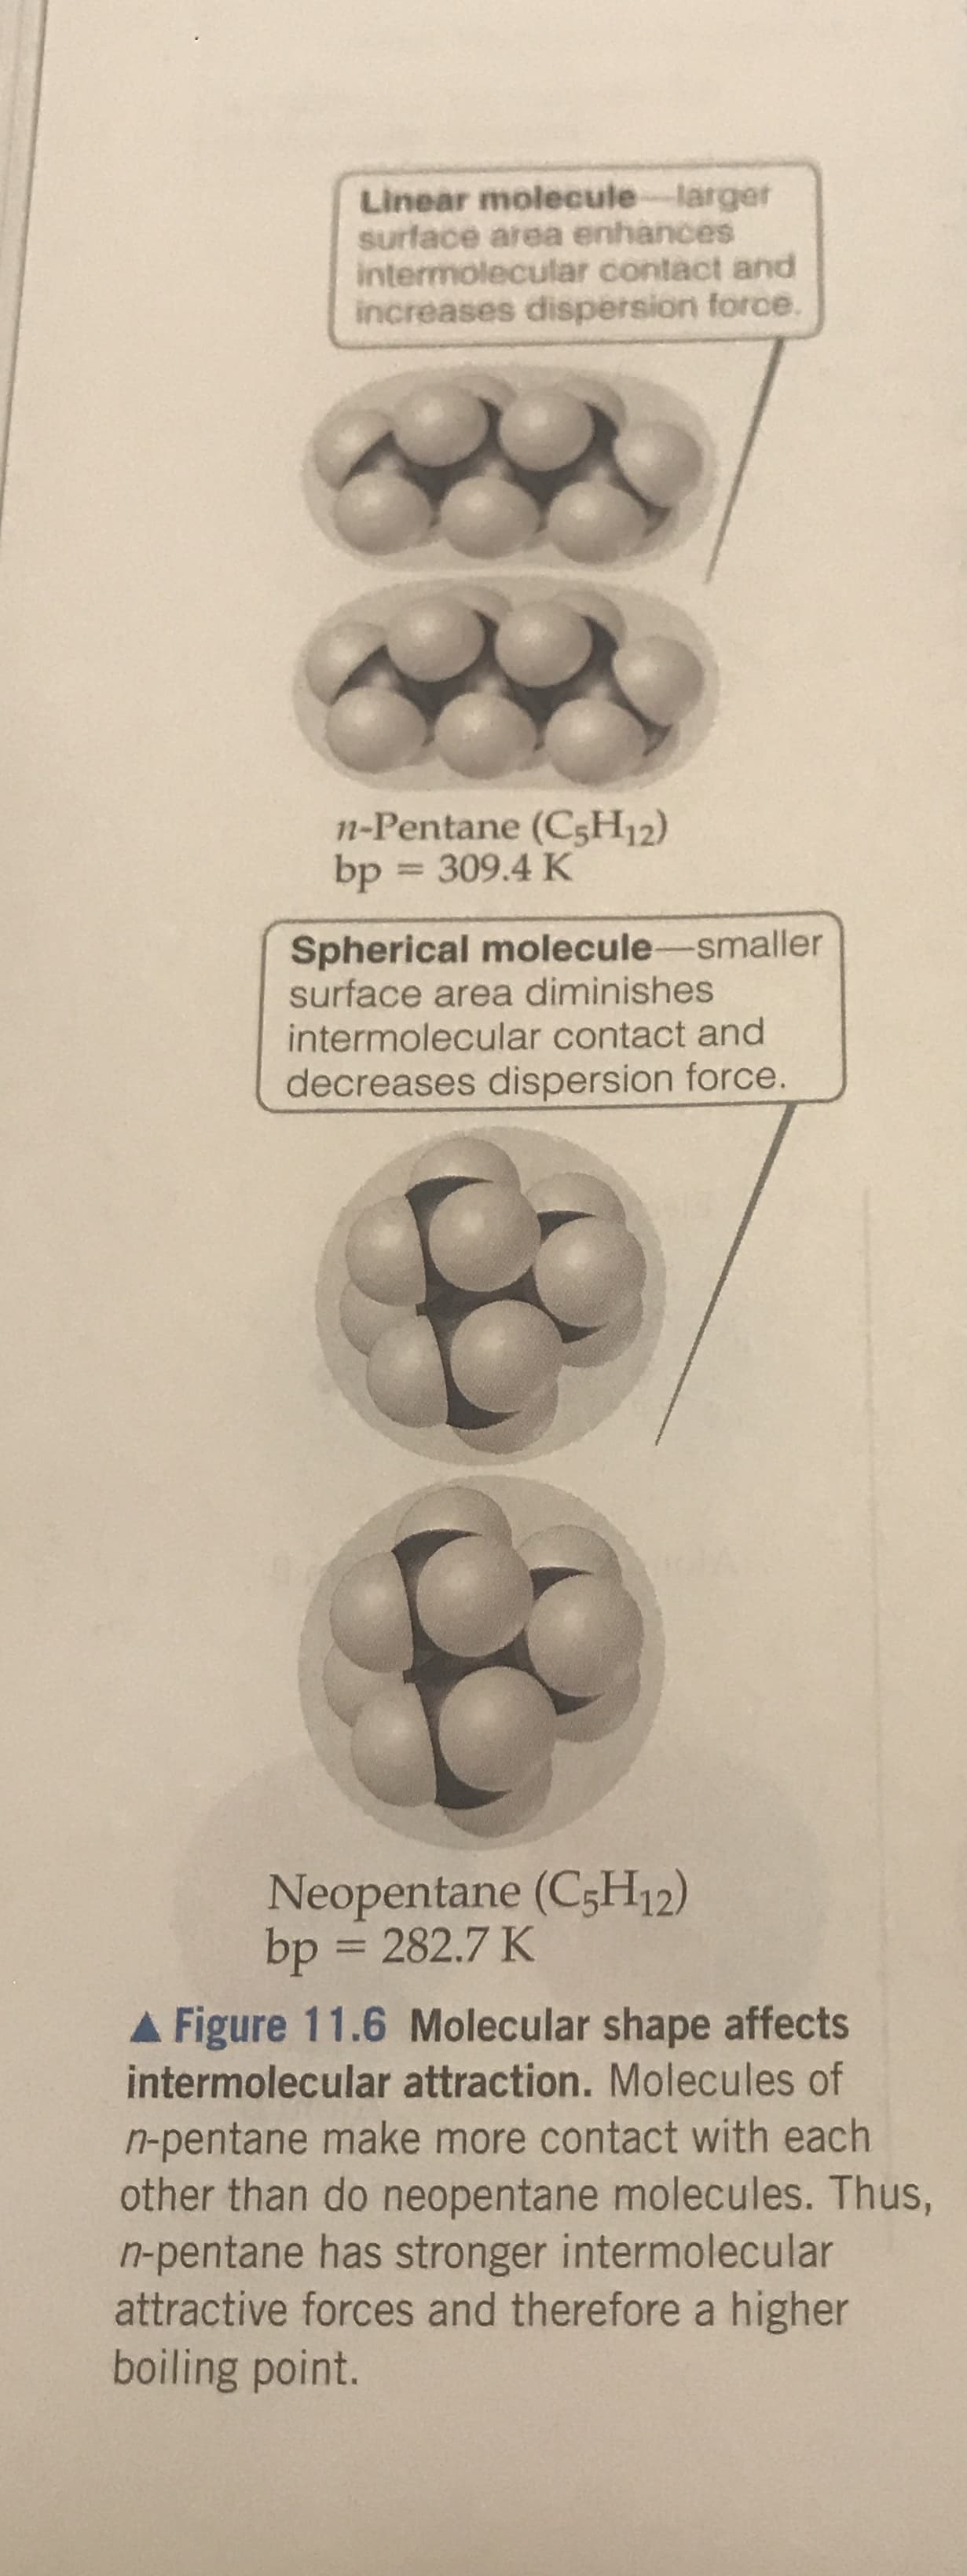 Linear molecule larger
Surface area enhances
intermolecular contact and
increases dispersion force.
n-Pentane (CsH12)
309.4 K
bp
Spherical molecule-smaller
surface area diminishes
intermolecular contact and
decreases dispersion force.
Neopentane (C5H12)
bp = 282.7 K
Figure 11.6 Molecular shape affects
intermolecular attraction. Molecules of
n-pentane make more contact with each
other than do neopentane molecules. Thus,
n-pentane has stronger intermolecular
attractive forces and therefore a higher
boiling point.
